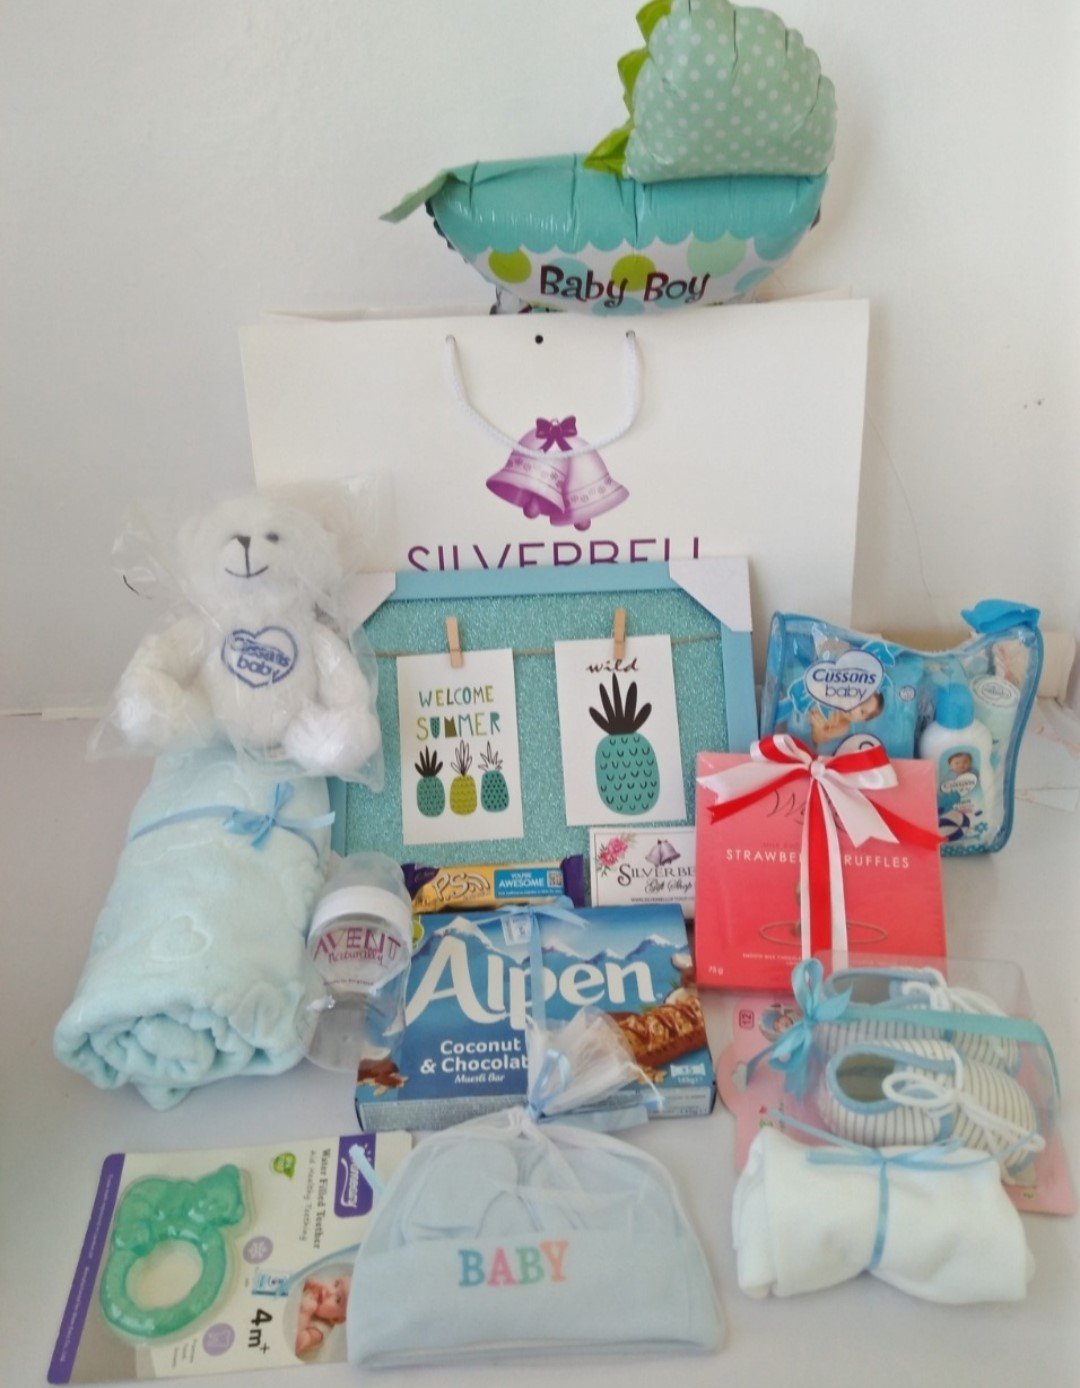 Baby boom gifts